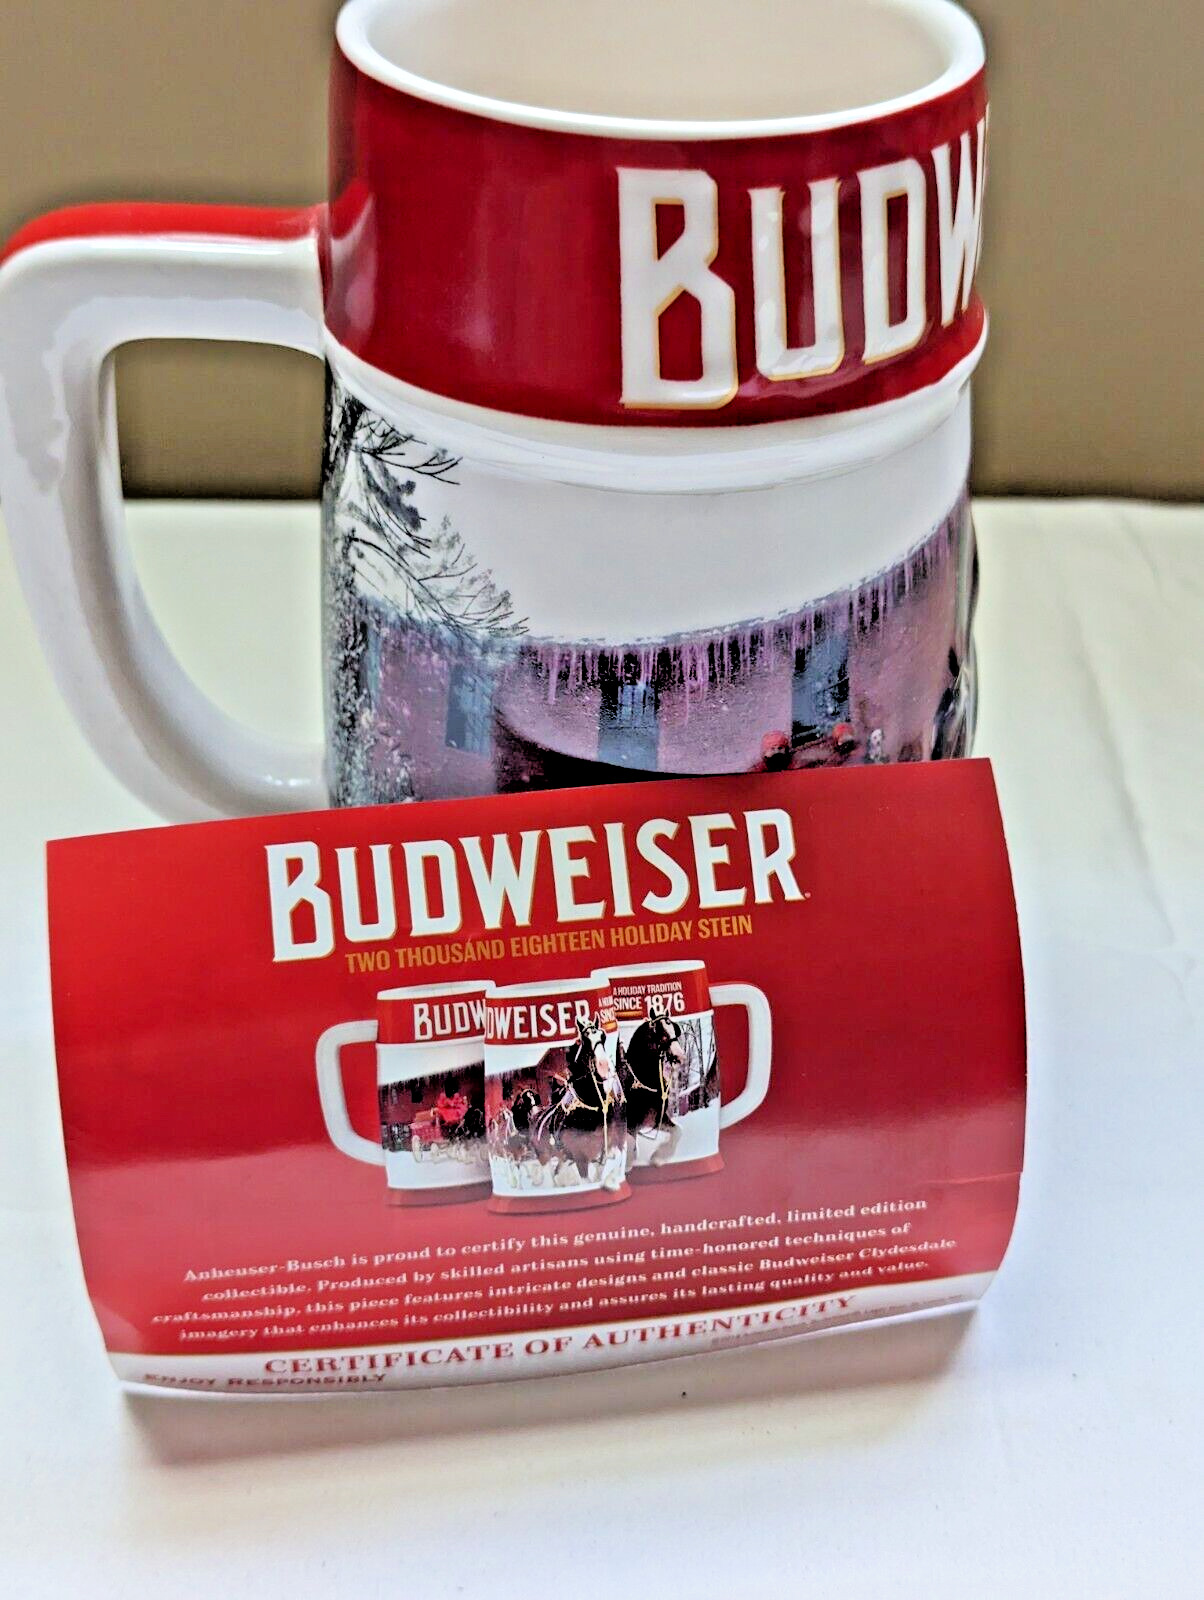 2018 Anheuser-Busch Holiday Tradition 39th Anniversary Edition with Coa